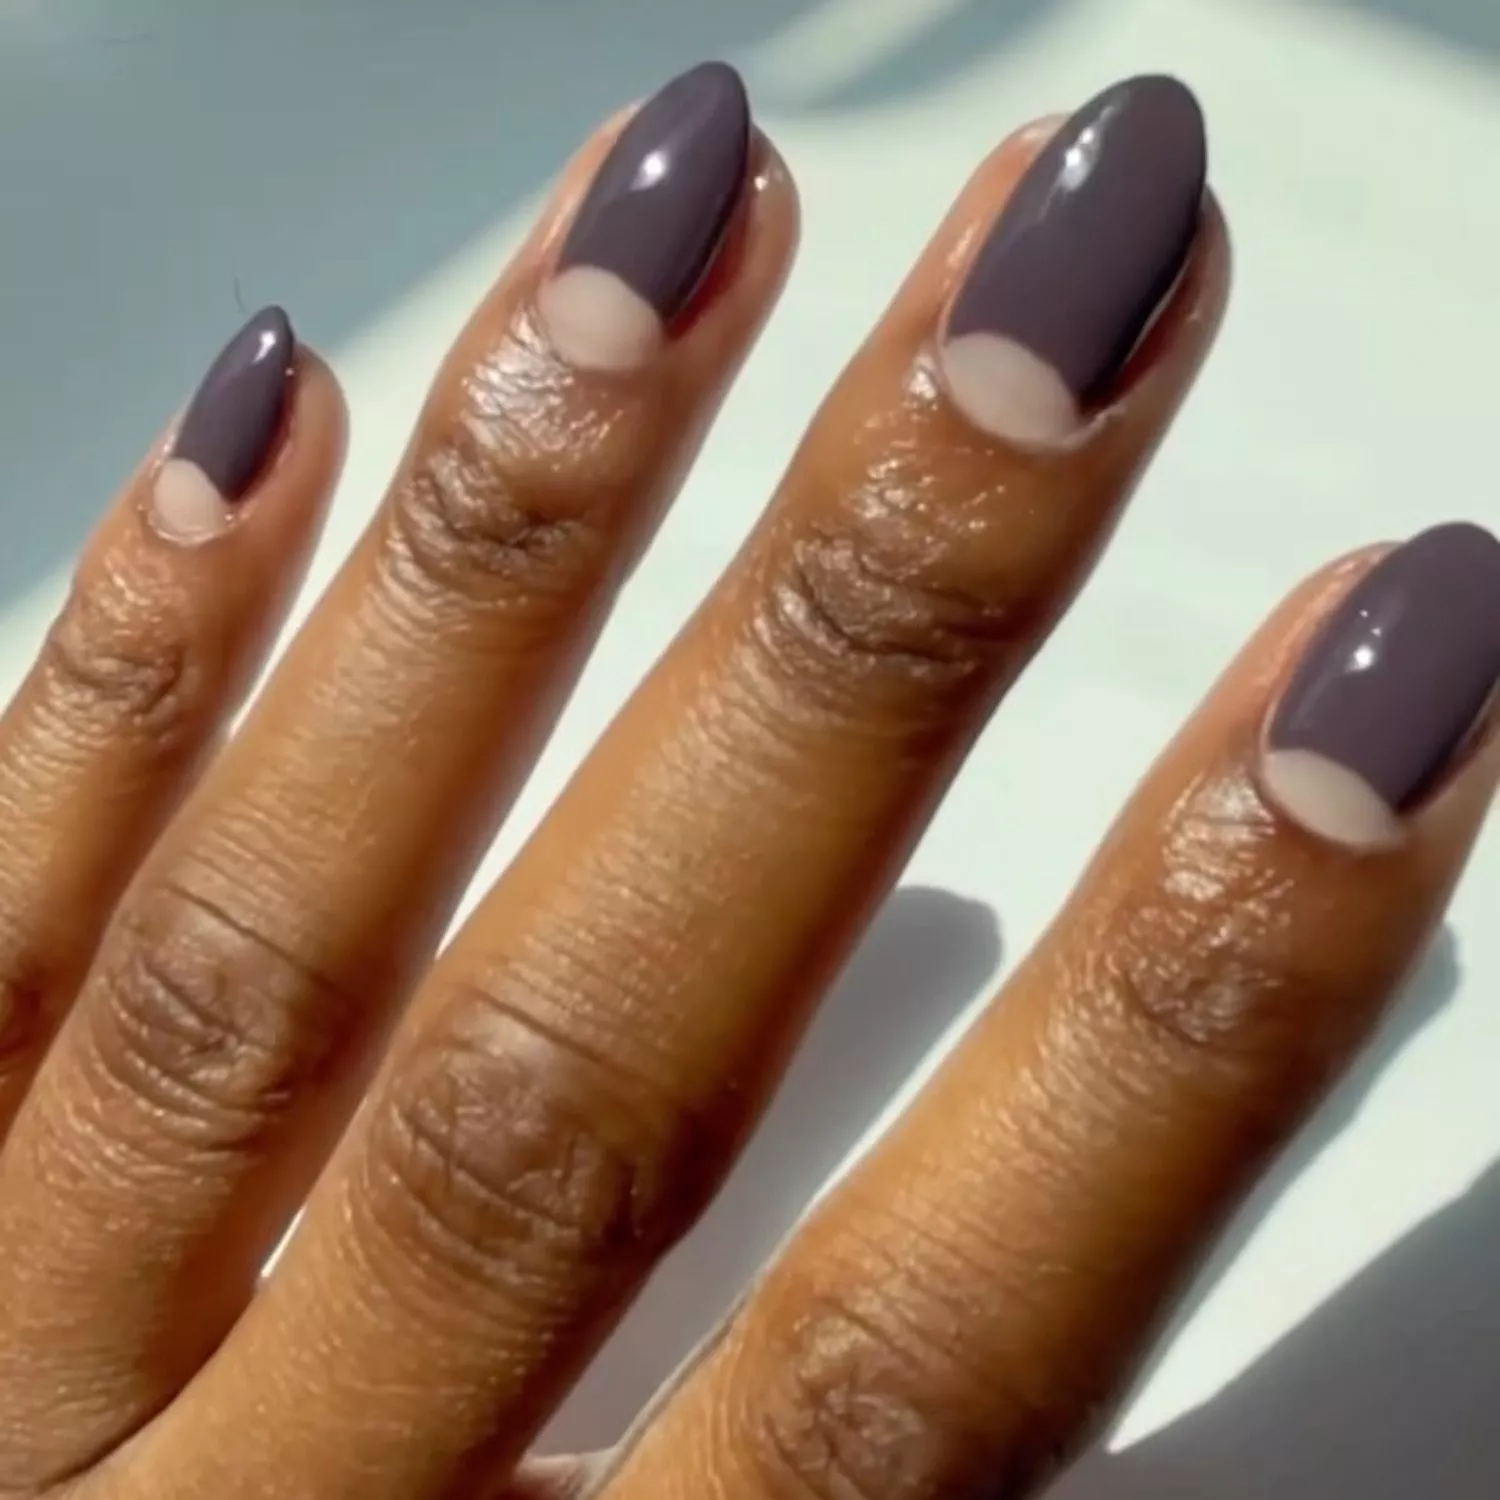 Almond-shaped manicure with dark gray polish and negative space cuticle half-moons